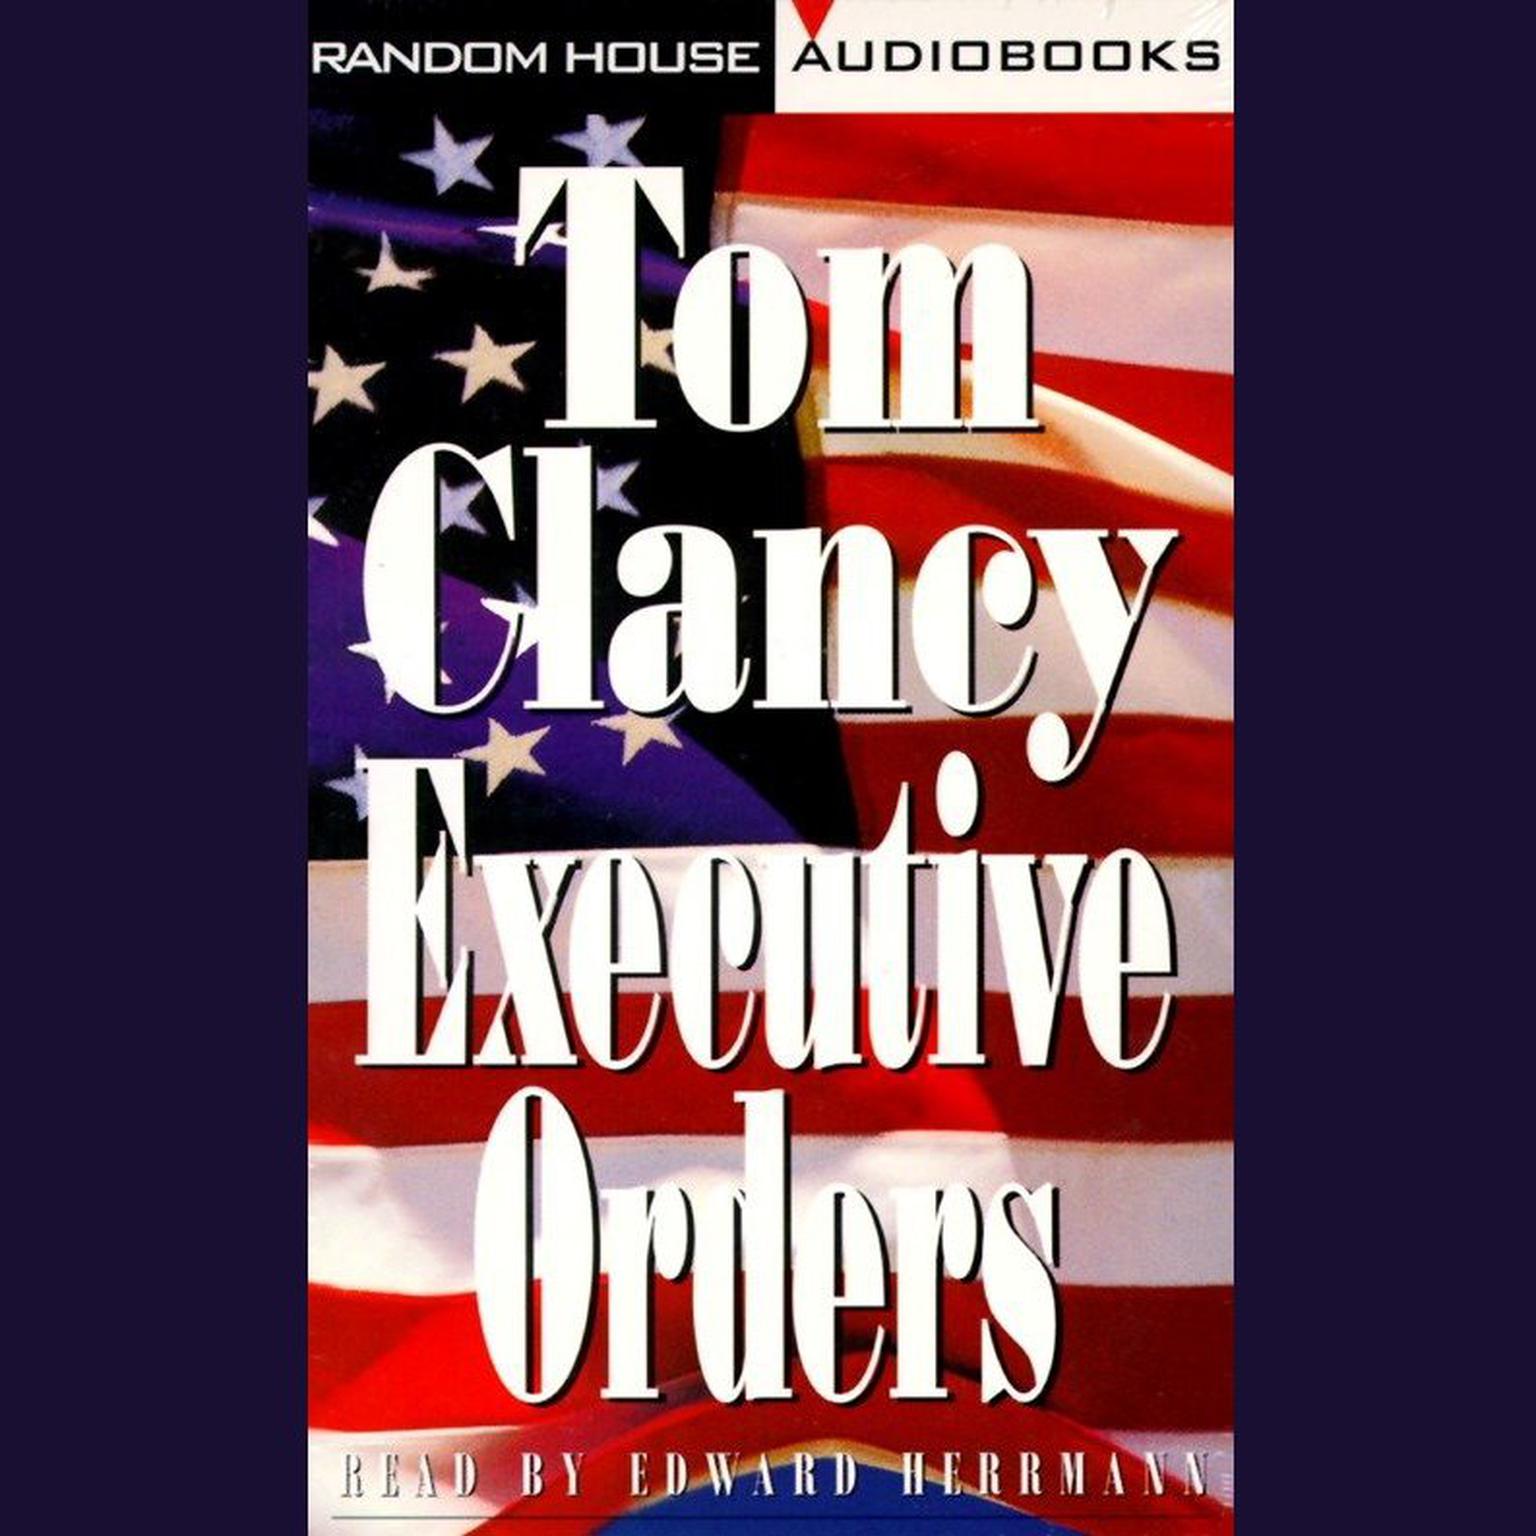 Executive Orders (Abridged) Audiobook, by Tom Clancy